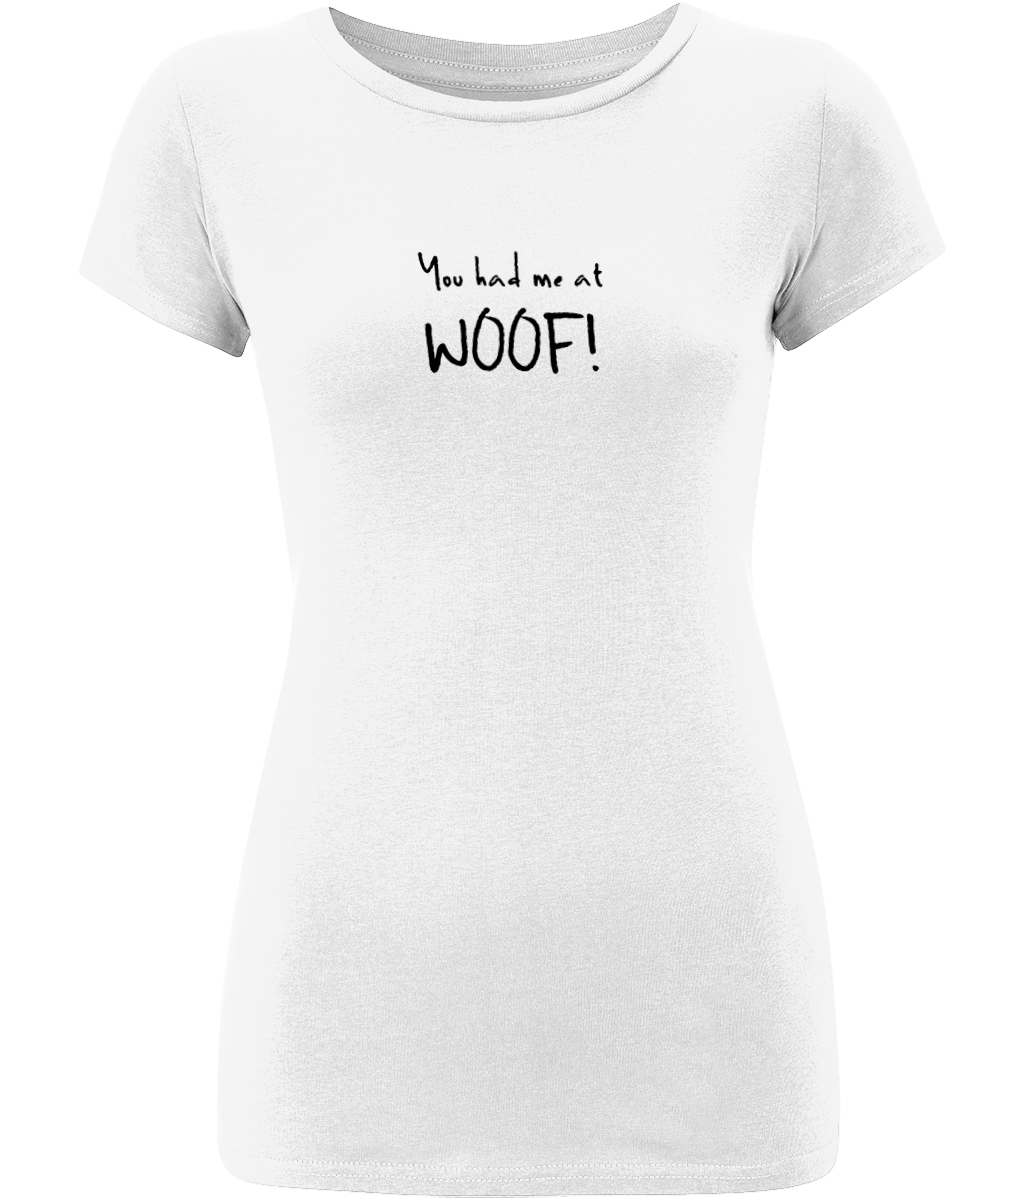 You had me at WOOF! Organic Fitted T